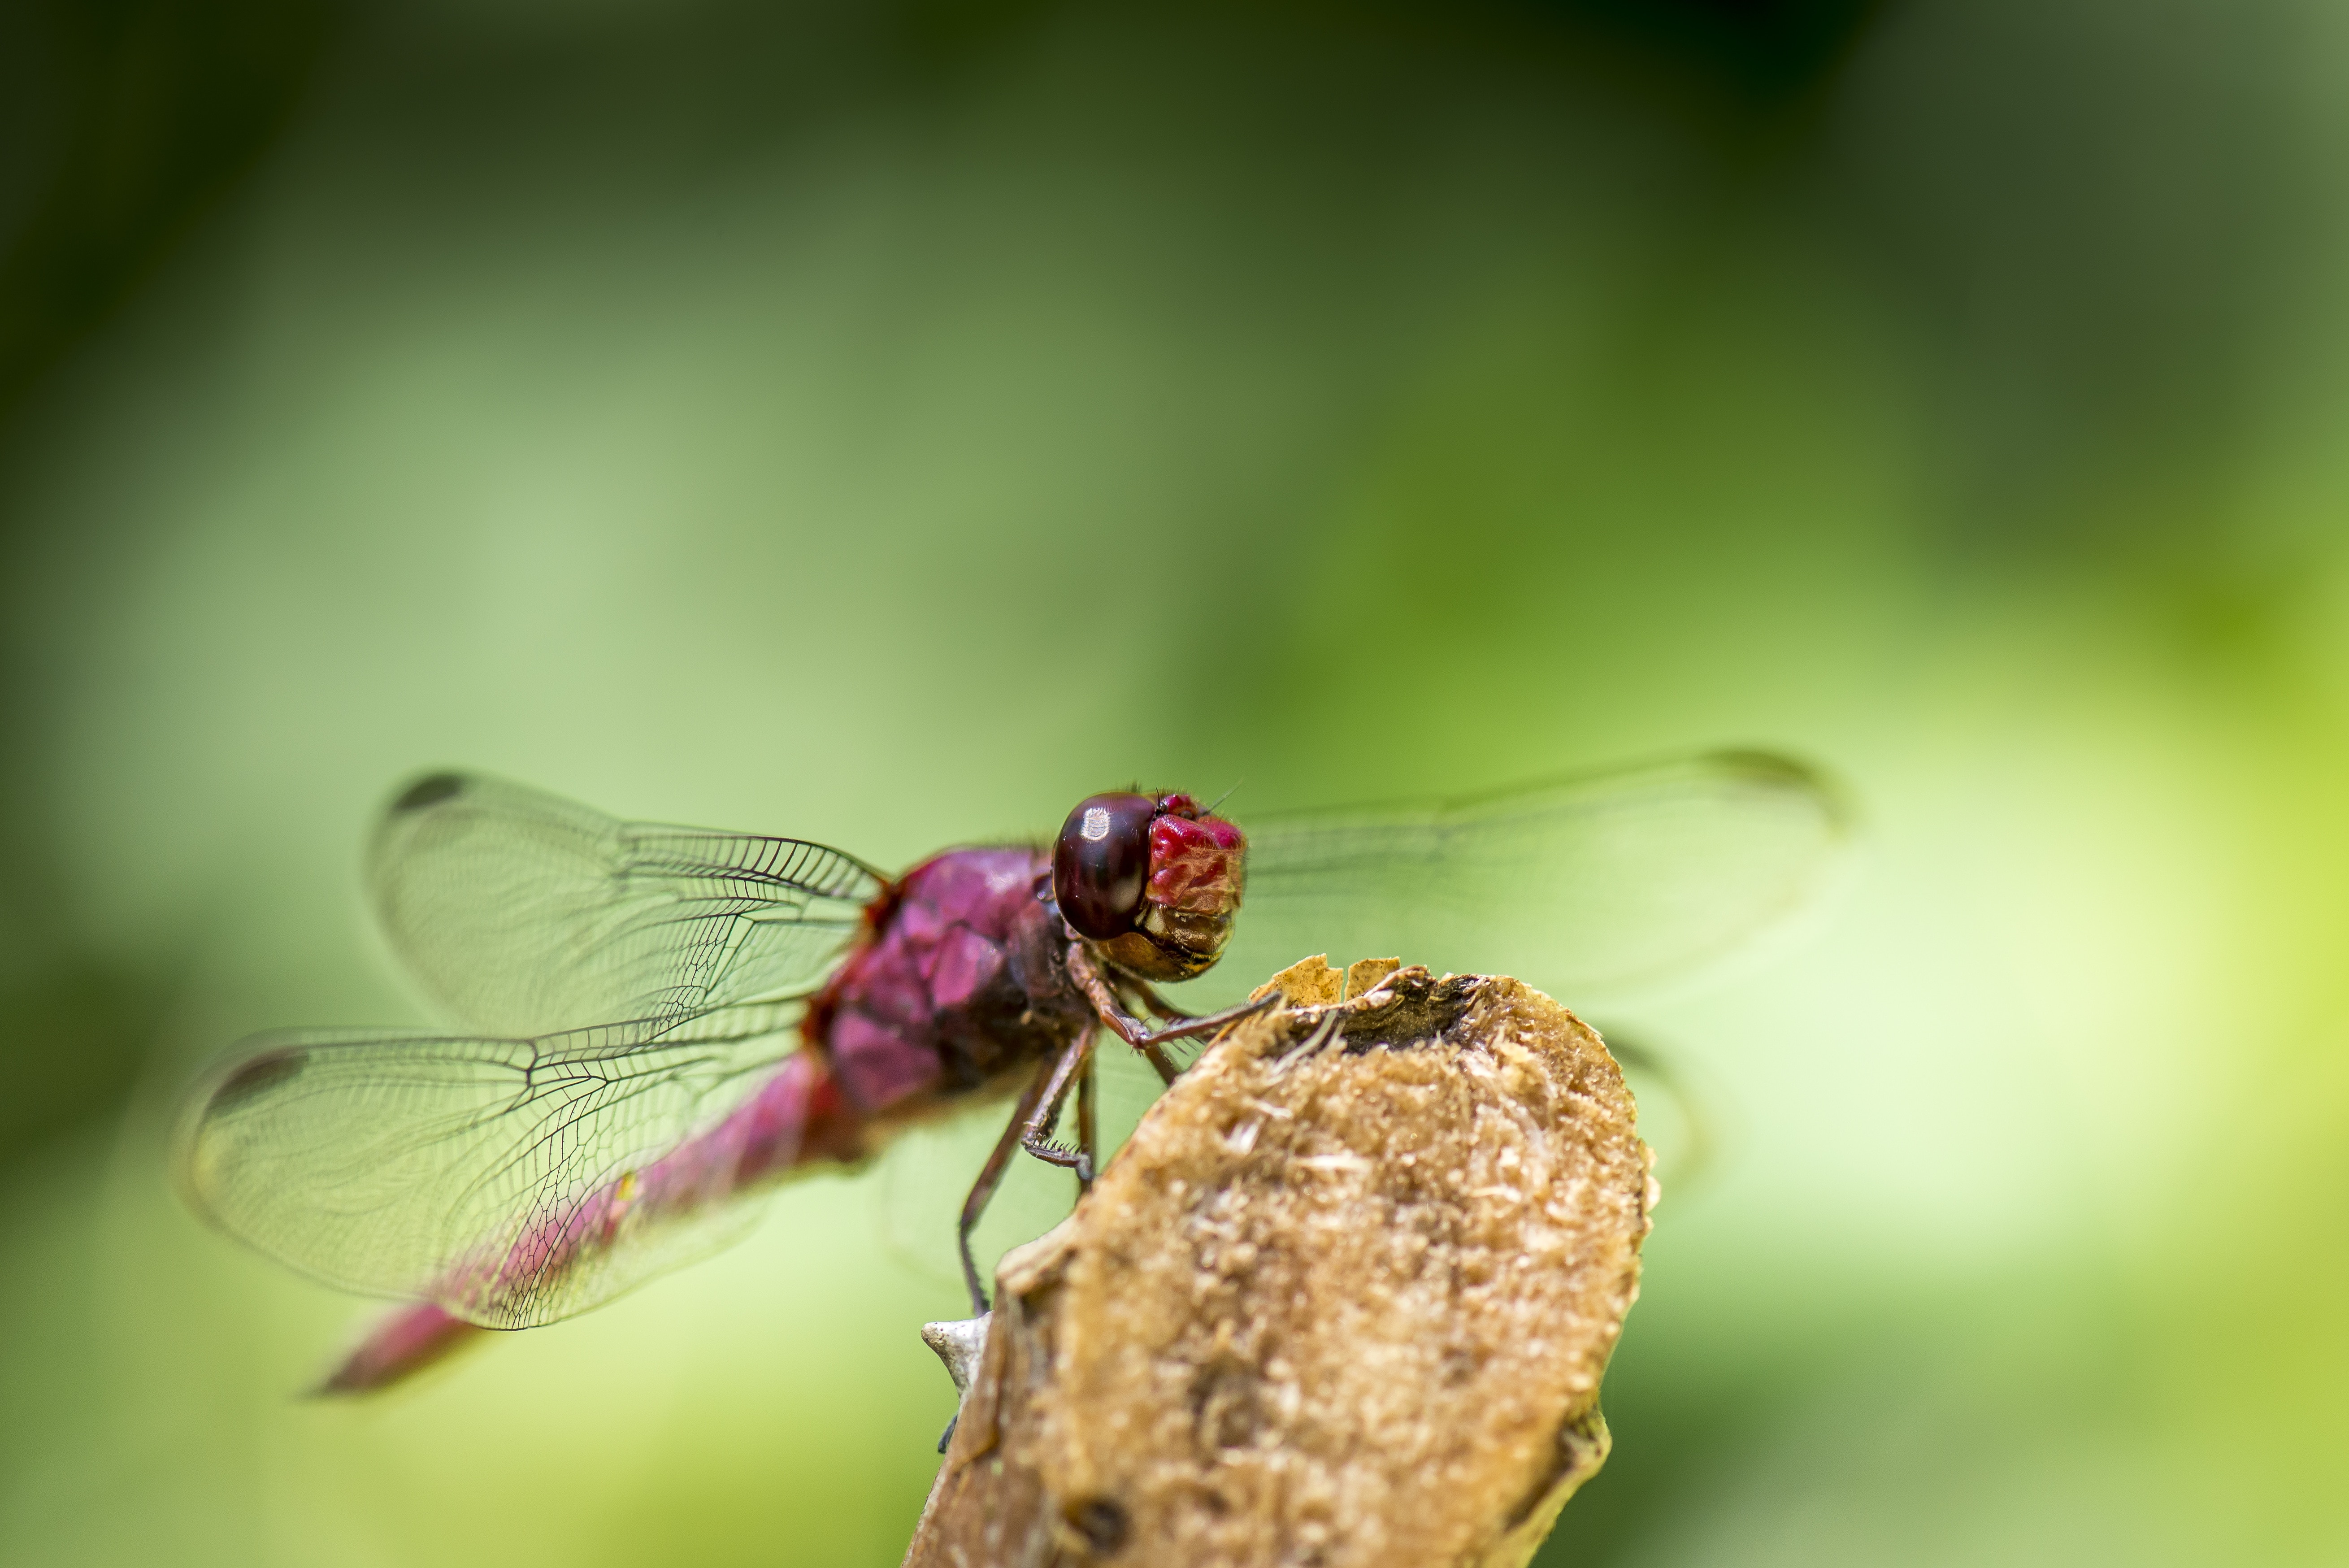 purple dragonfly perched on brown branch in selective focus photography